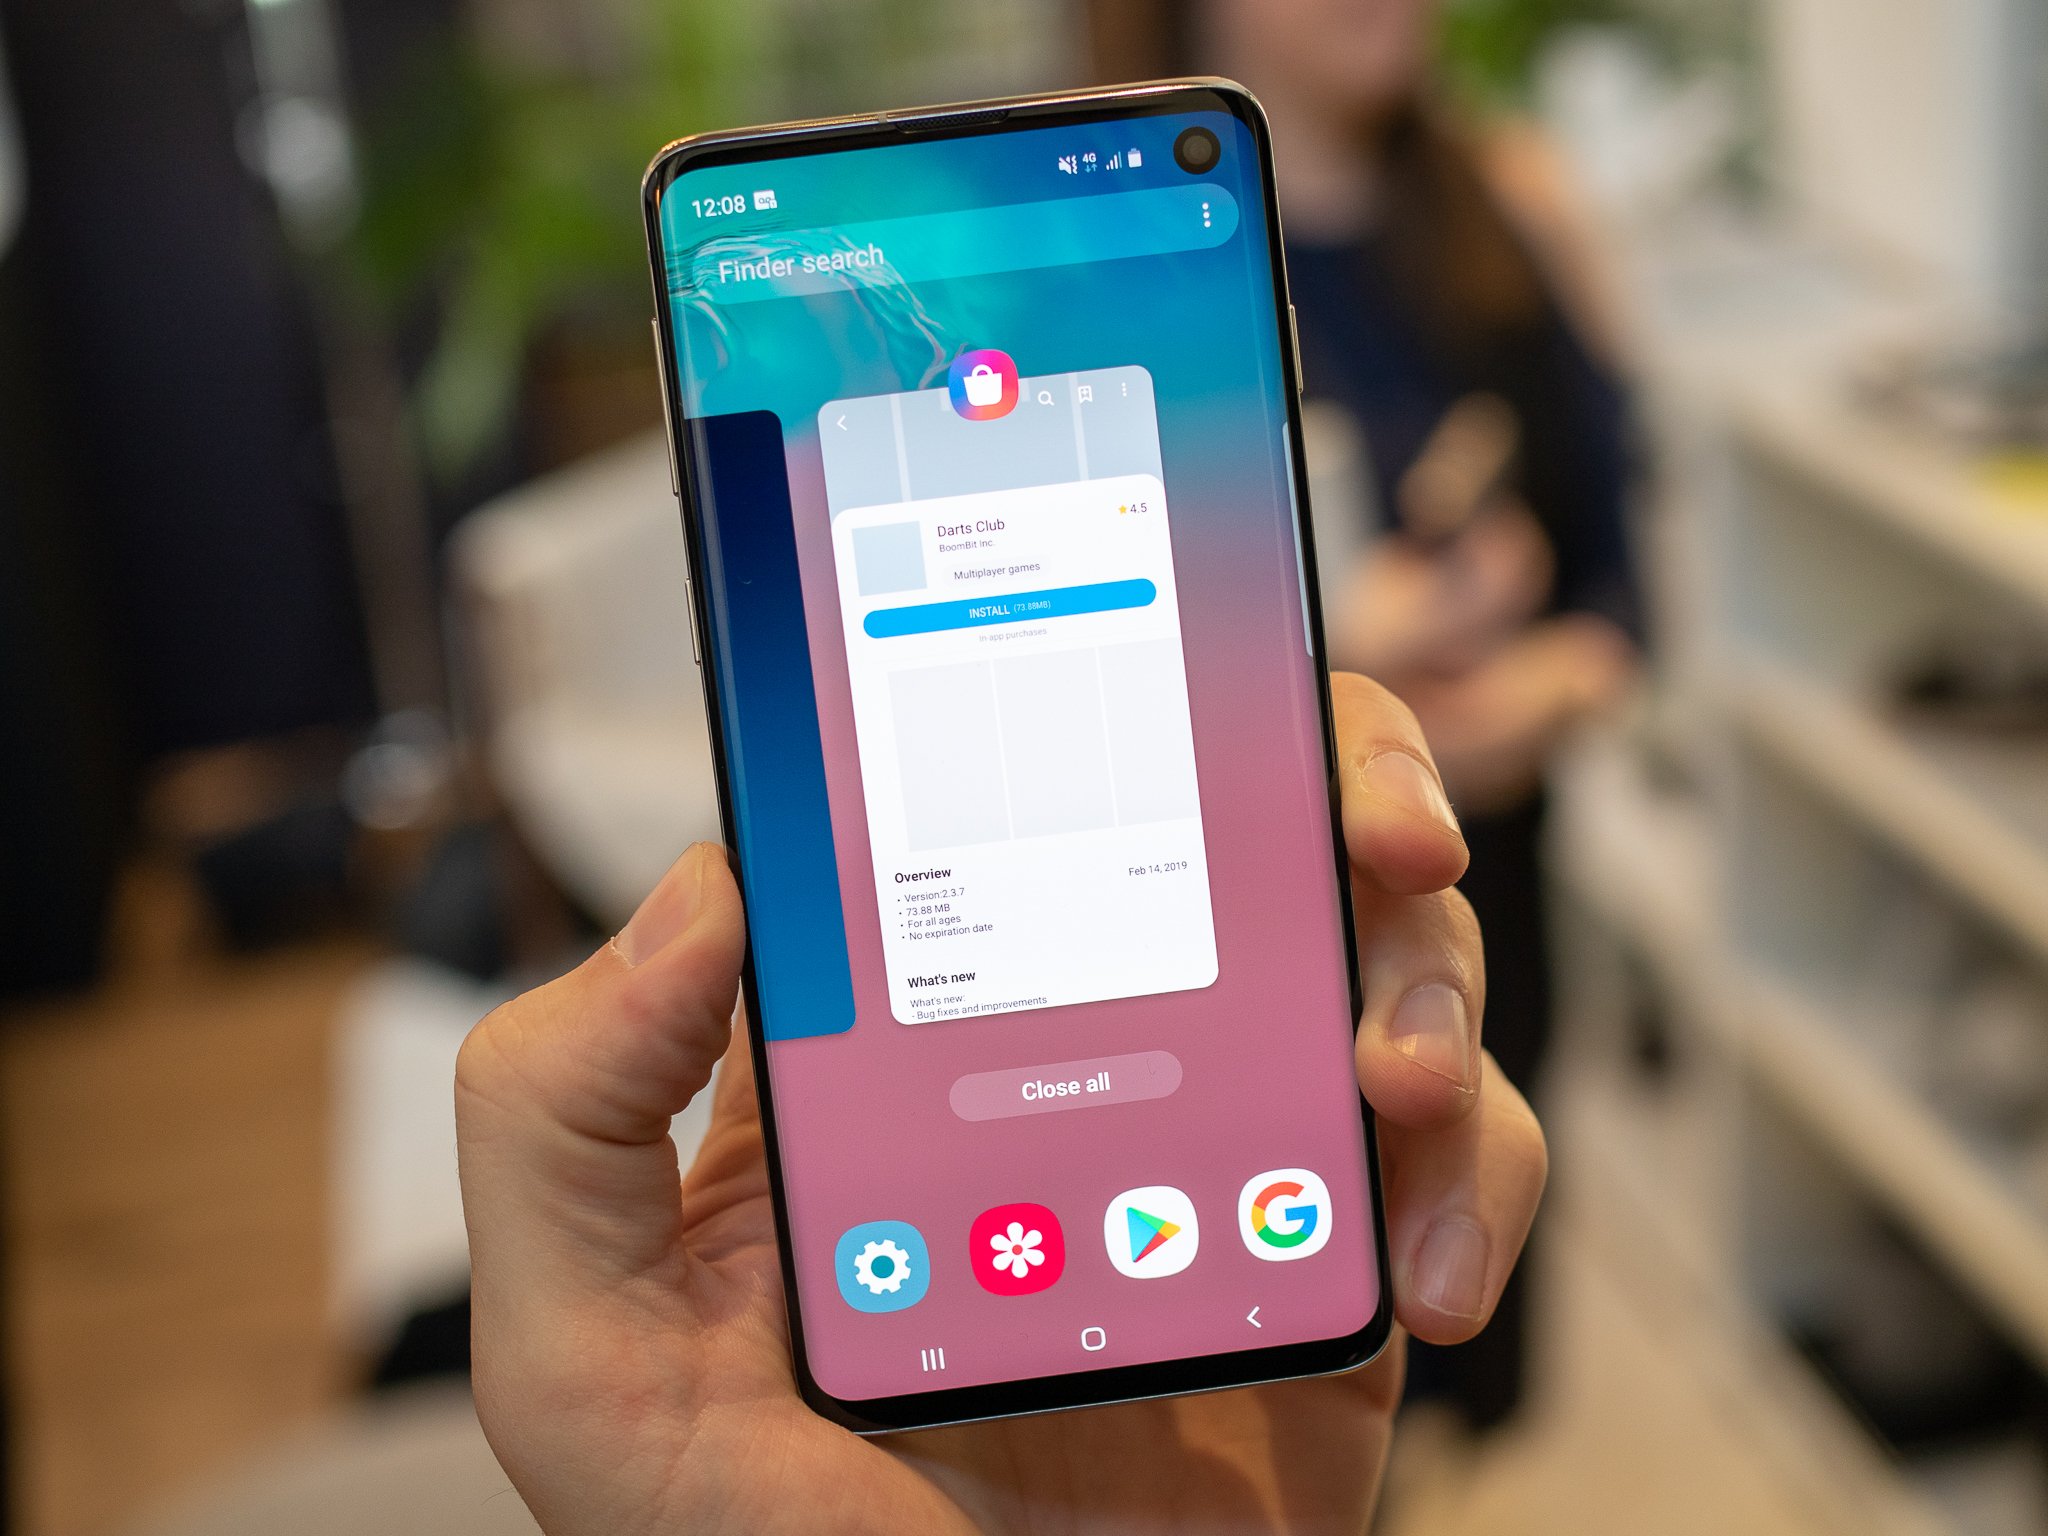 Galaxy S10 Vs Galaxy S8 Should You Upgrade Android Central